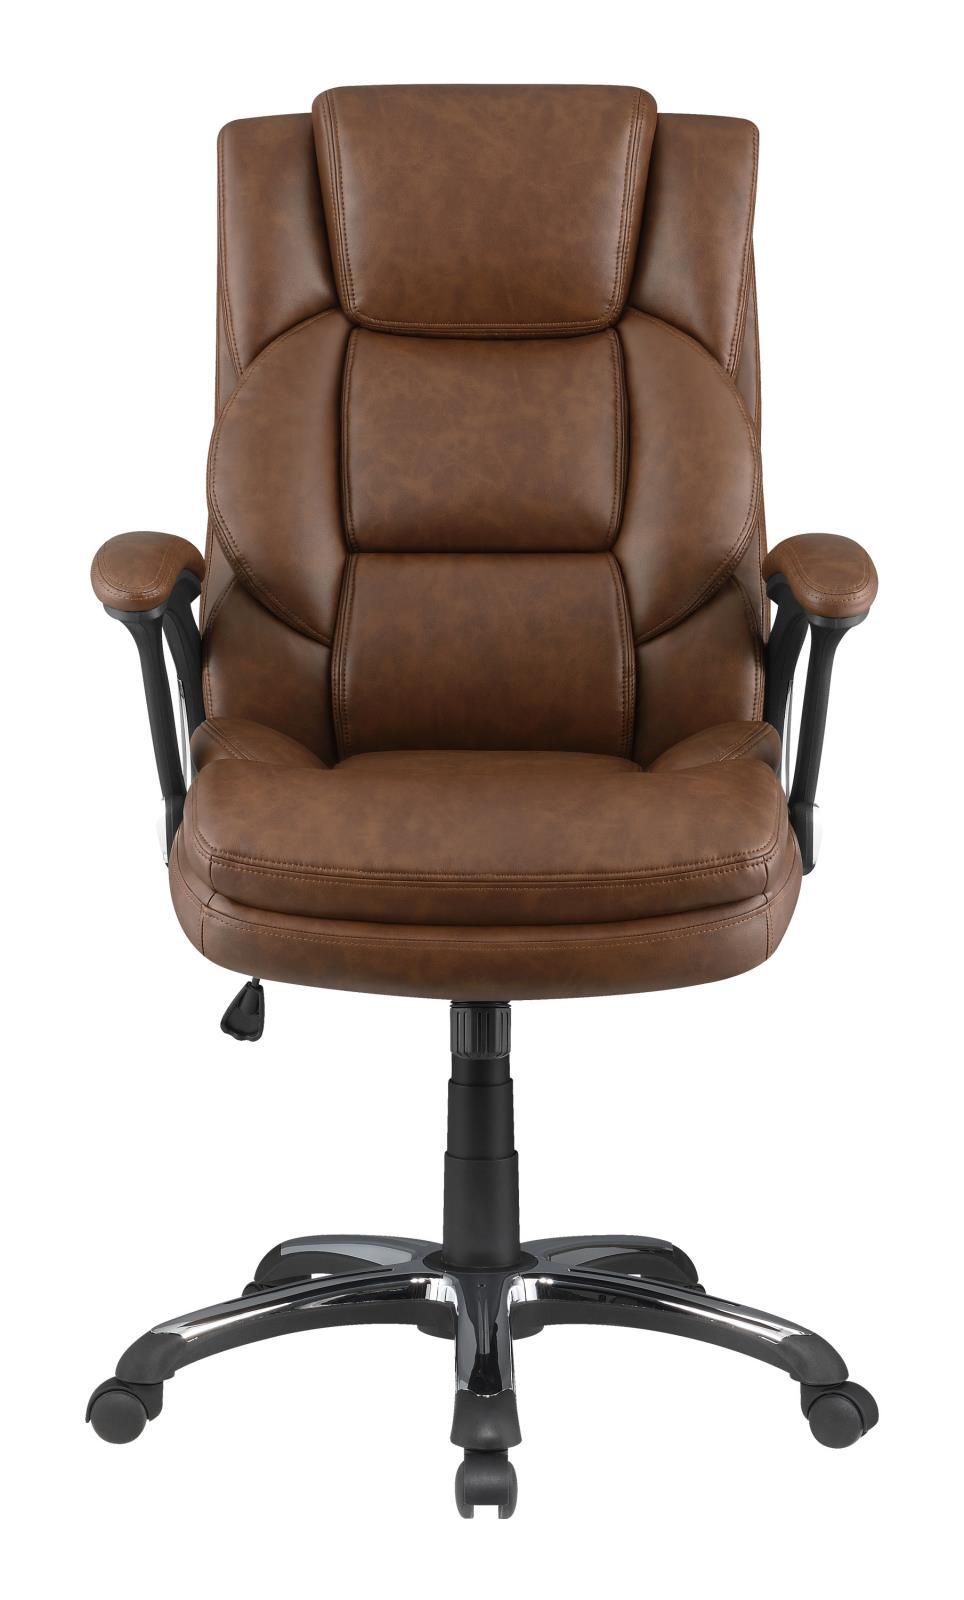 Nerris Adjustable Height Office Chair with Padded Arm Brown and Black - Half Price Furniture